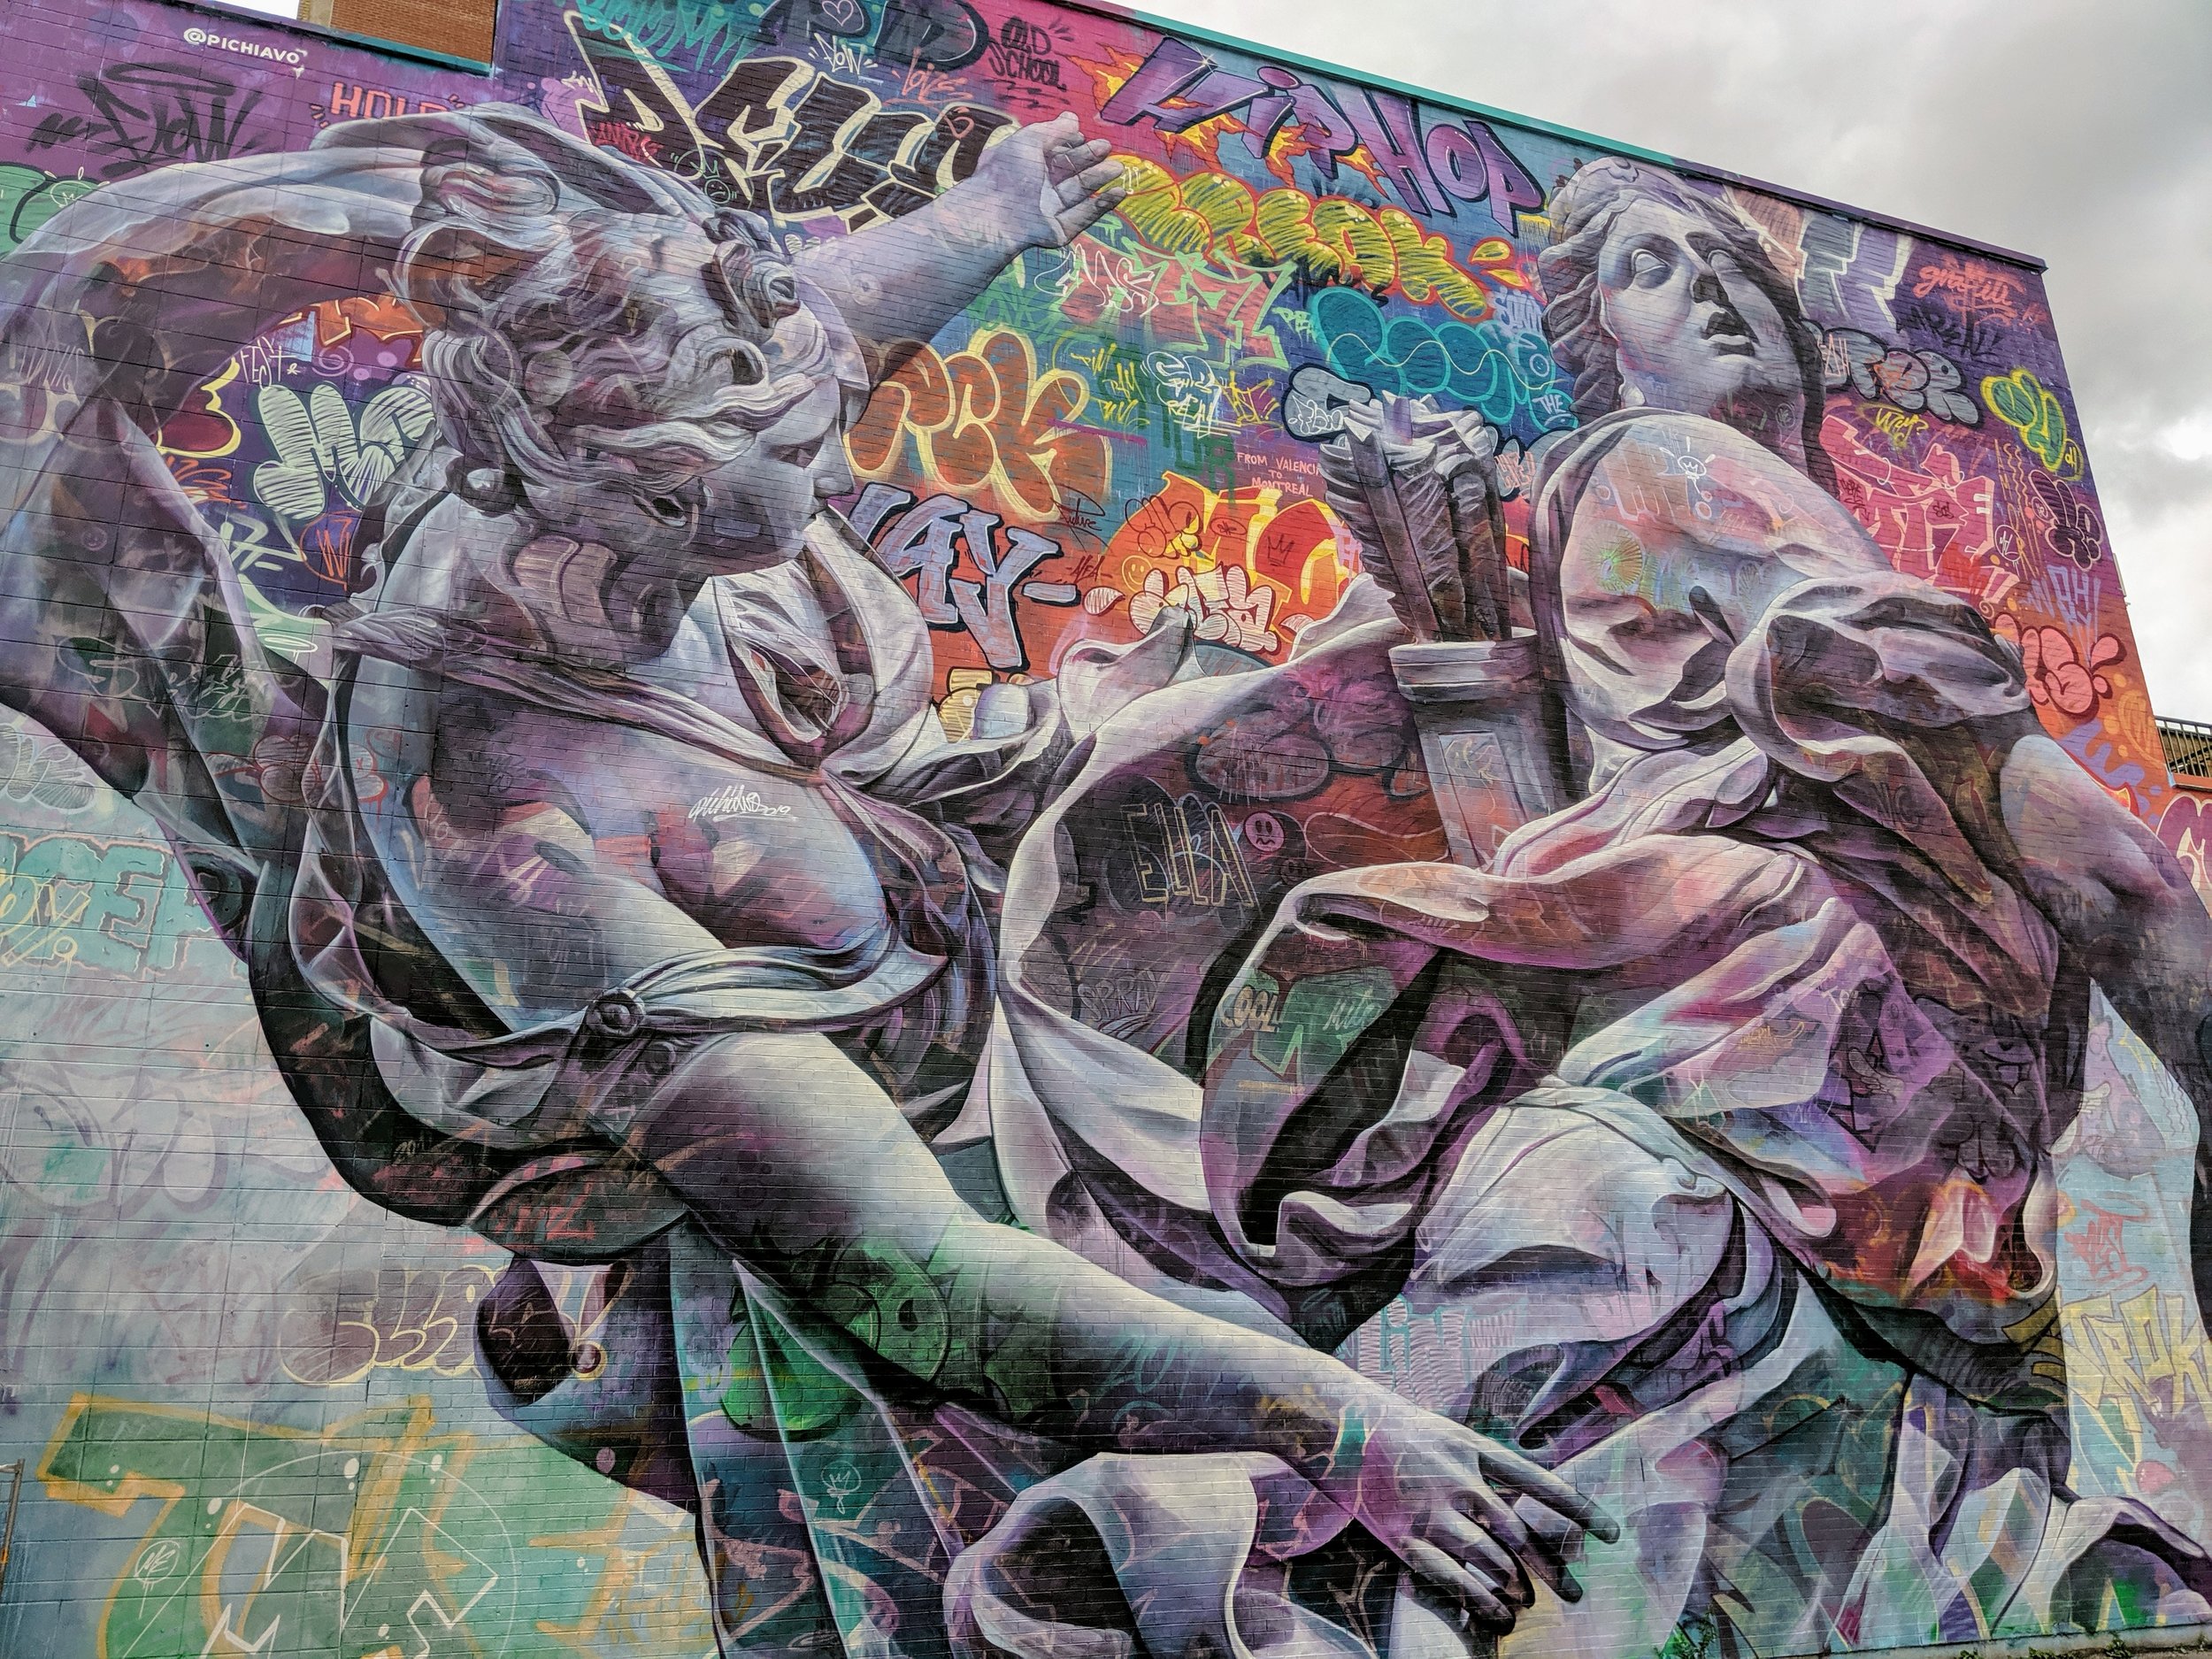 Street art in Montreal portraying 2 angels